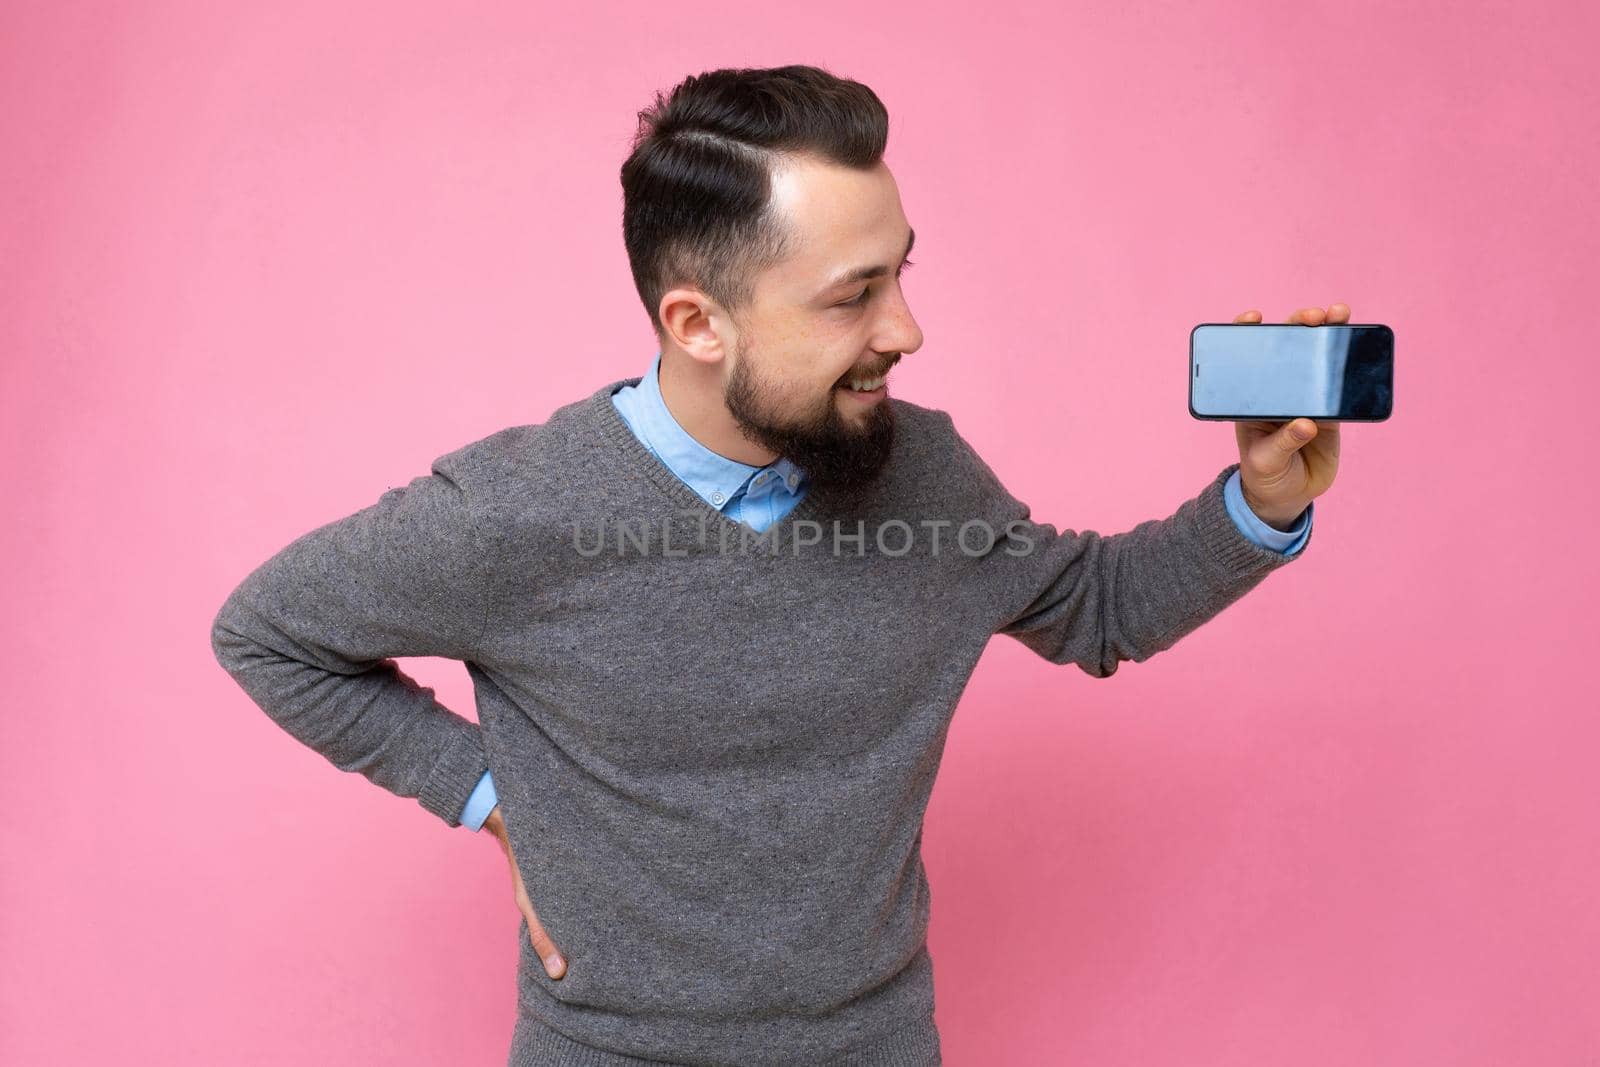 Closeup photo of amazing guy holding modern telephone hands casual outfit isolated on bright pink background.